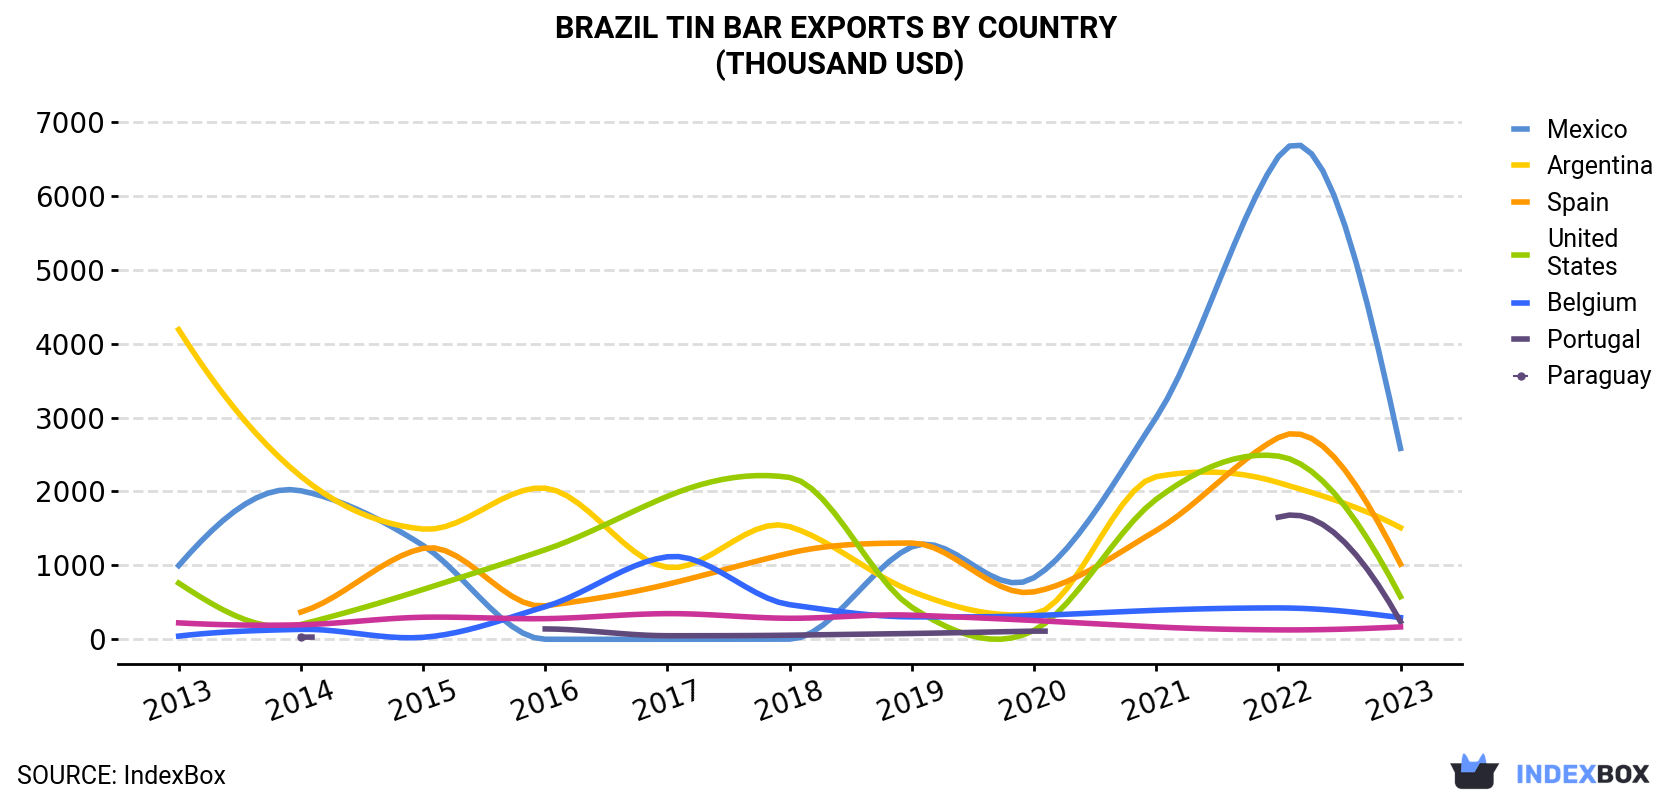 Brazil Tin Bar Exports By Country (Thousand USD)